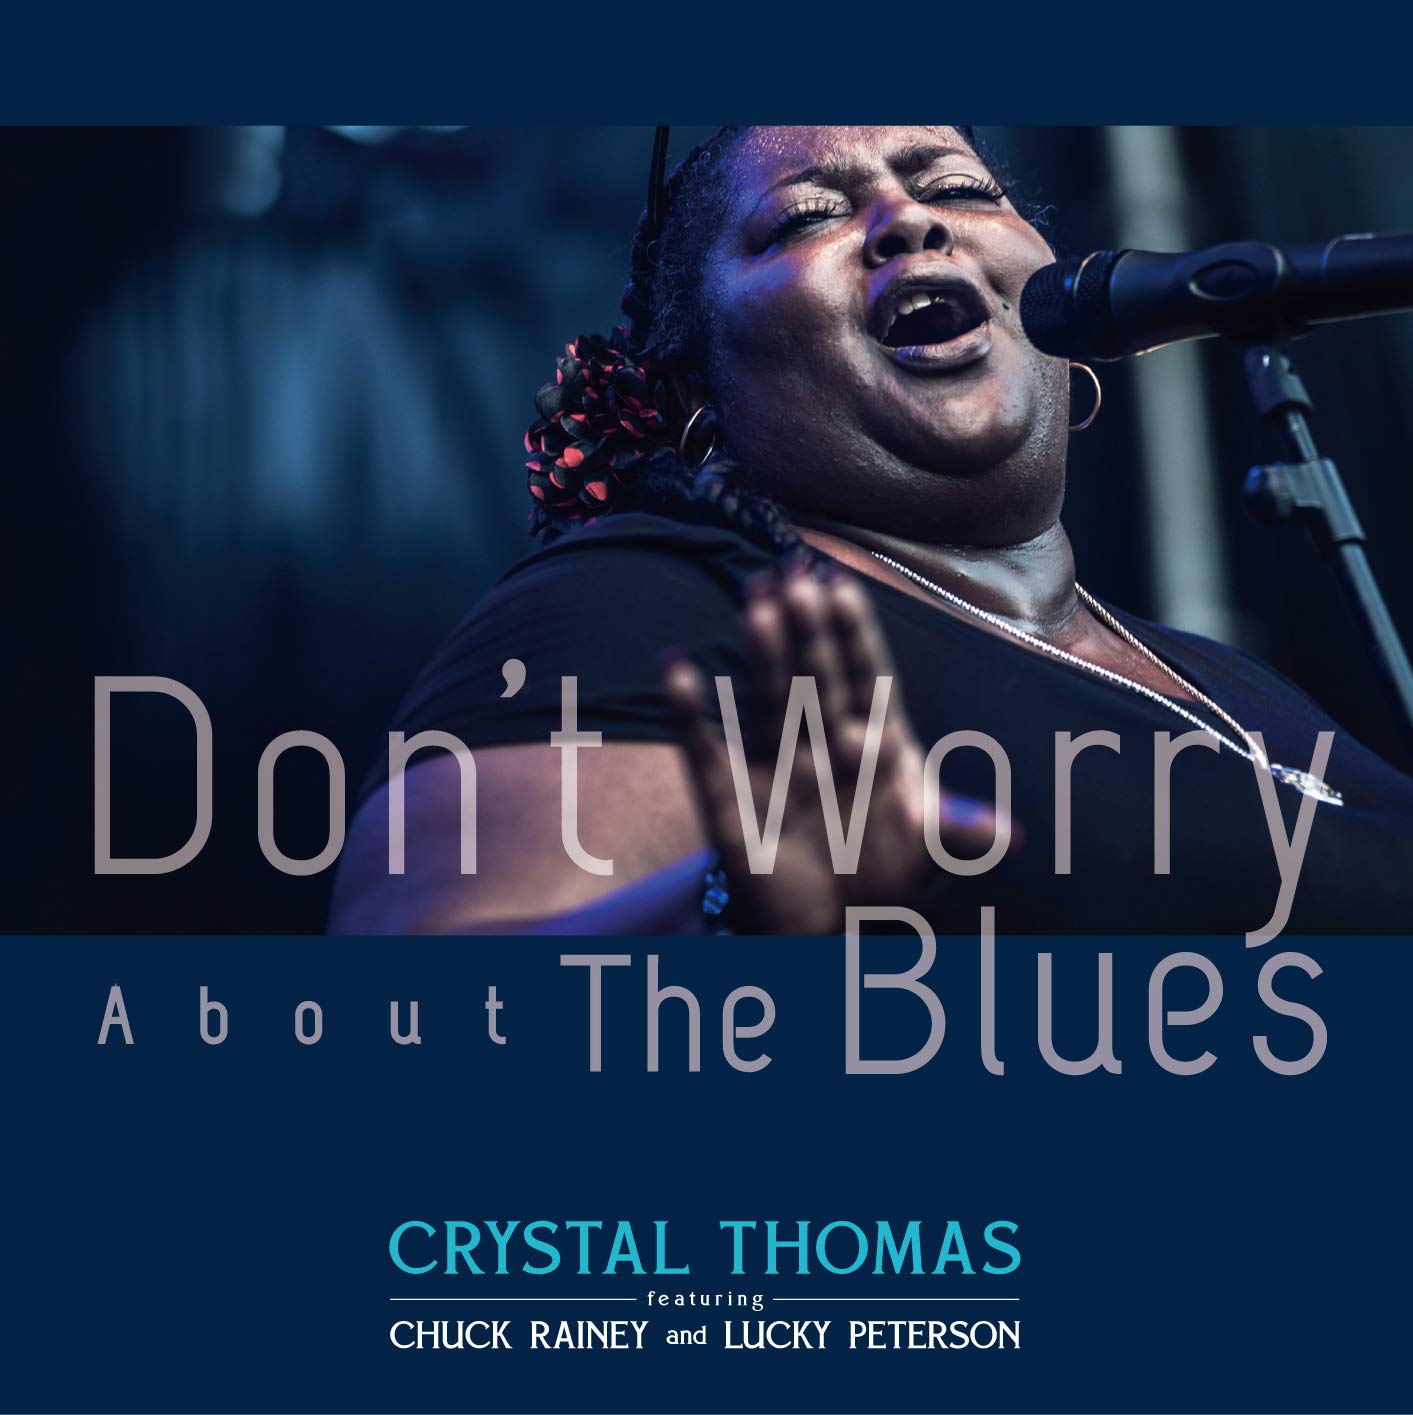 Crystal Thomas featuring Chuck Rainey and Lucky Peterson